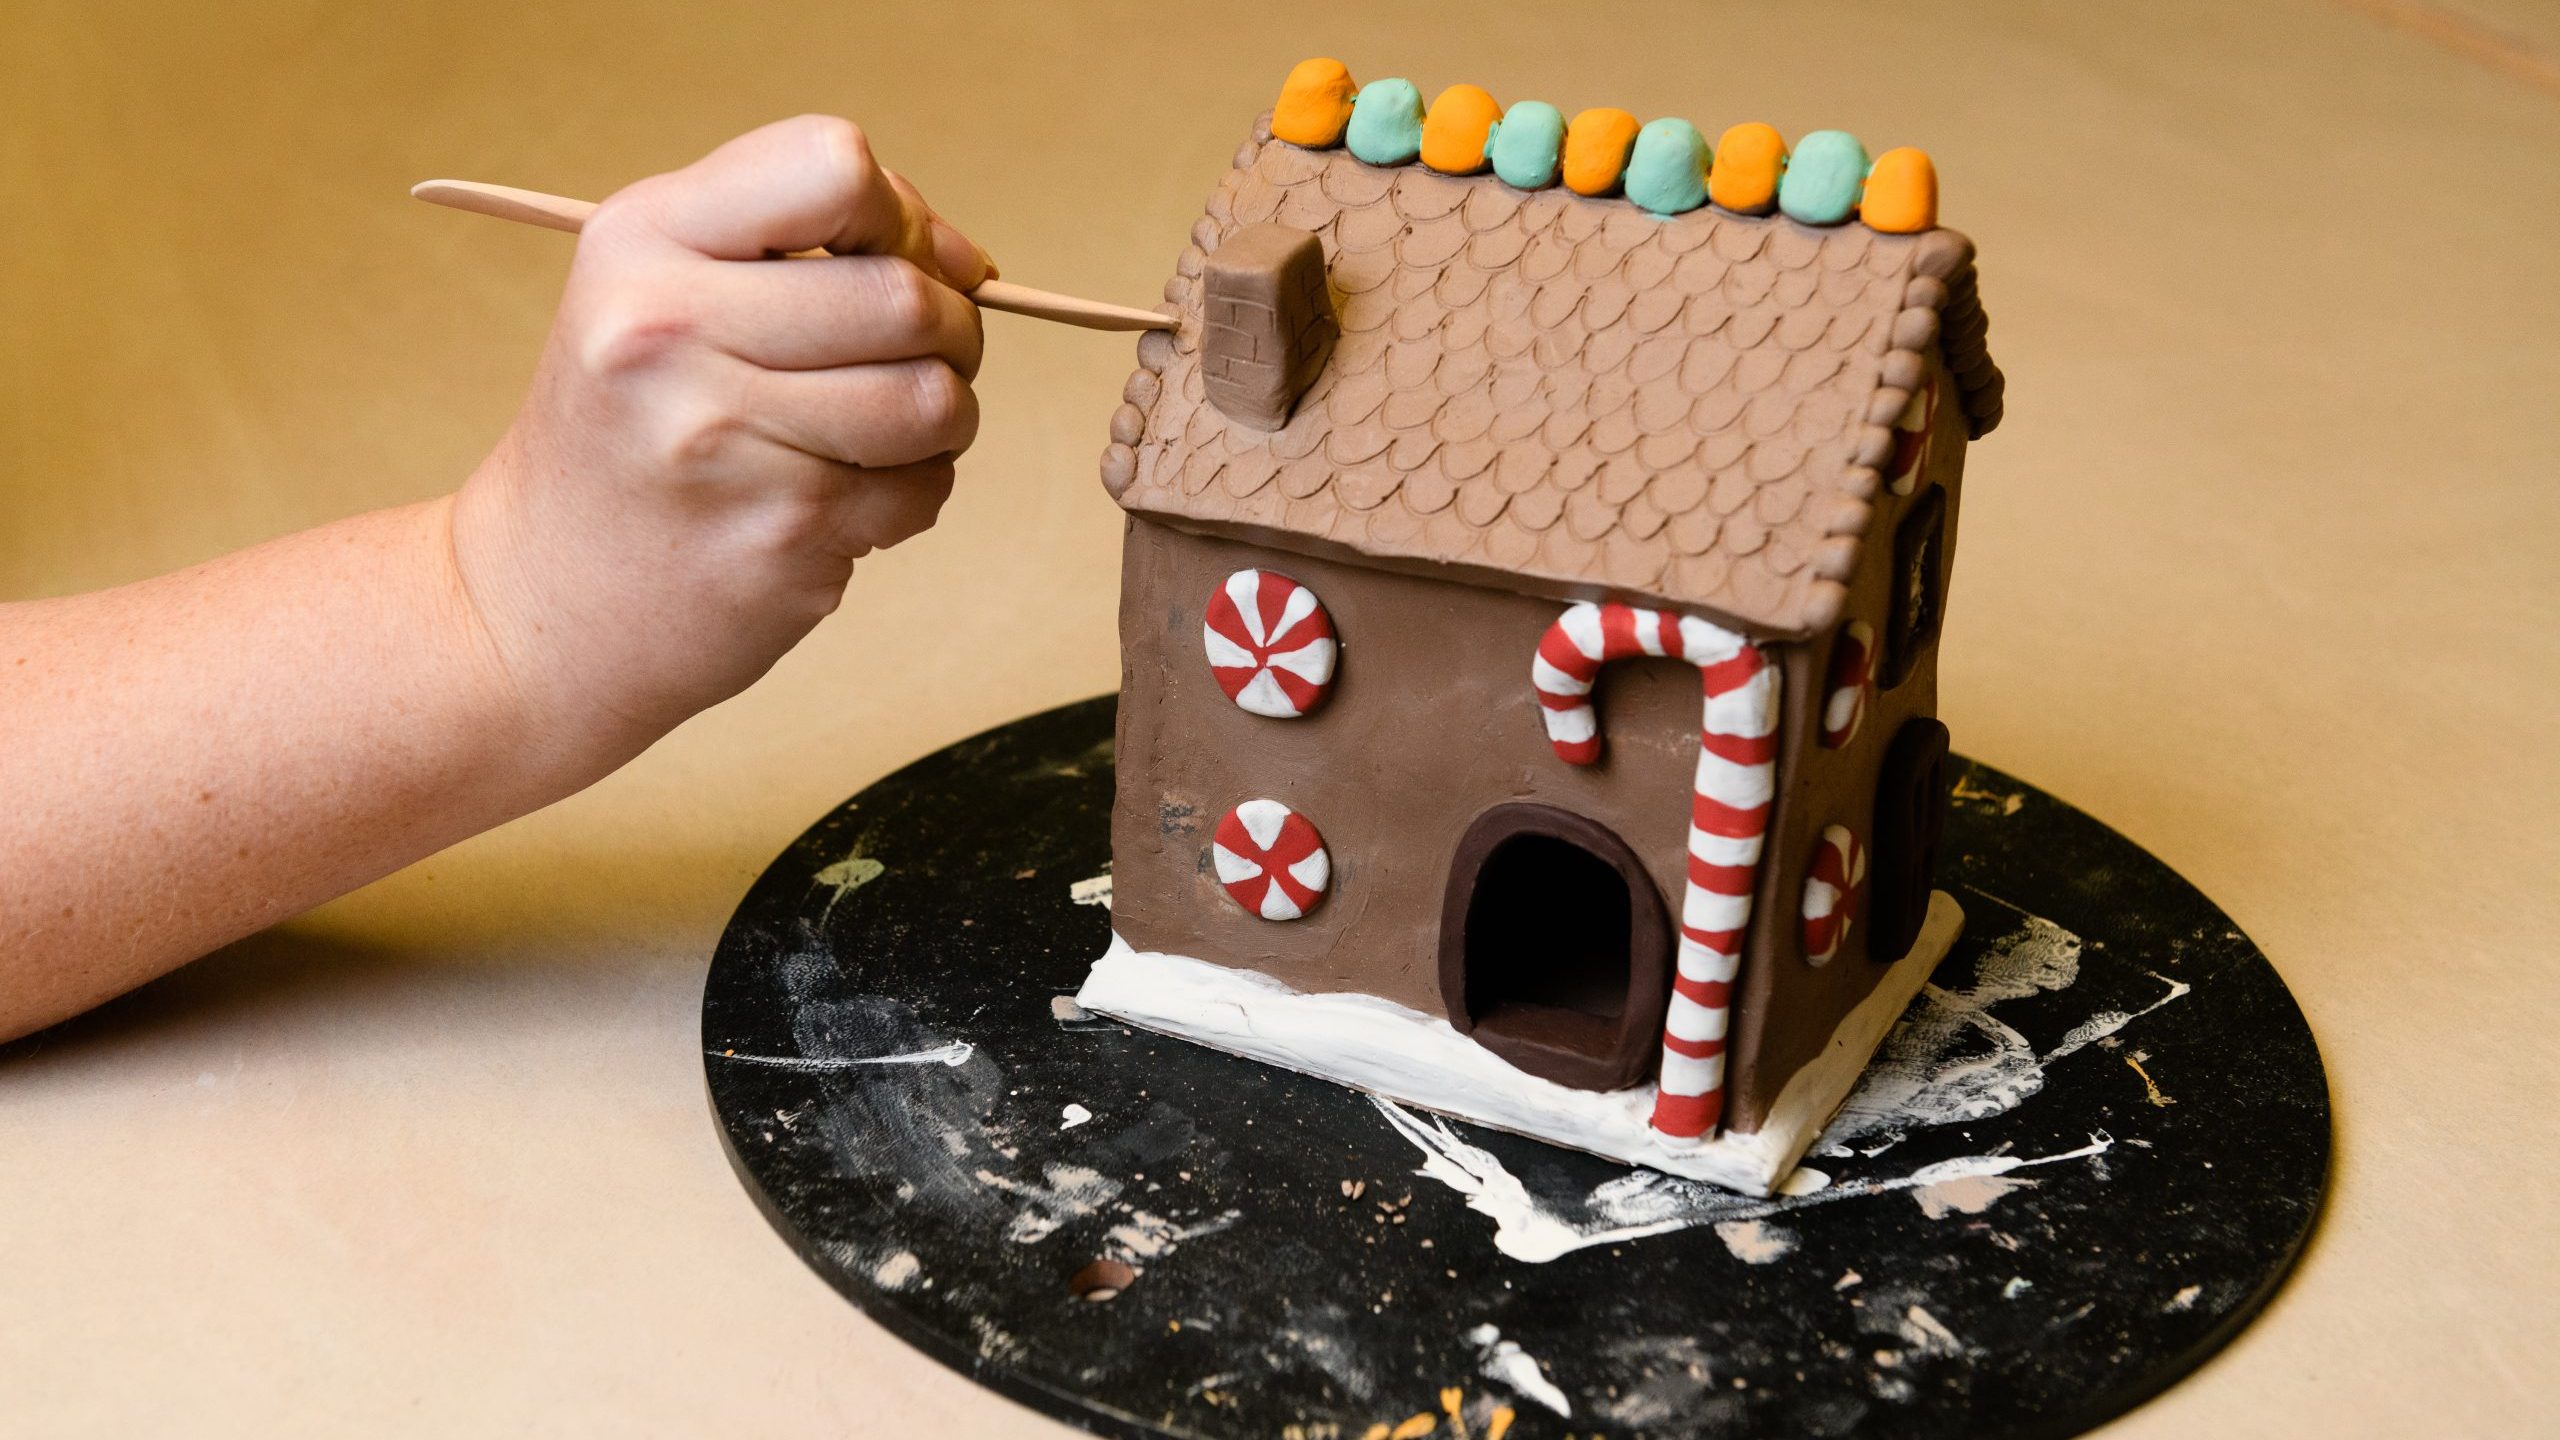 Unfinished clay gingerbread house with a white hand holding a tool.